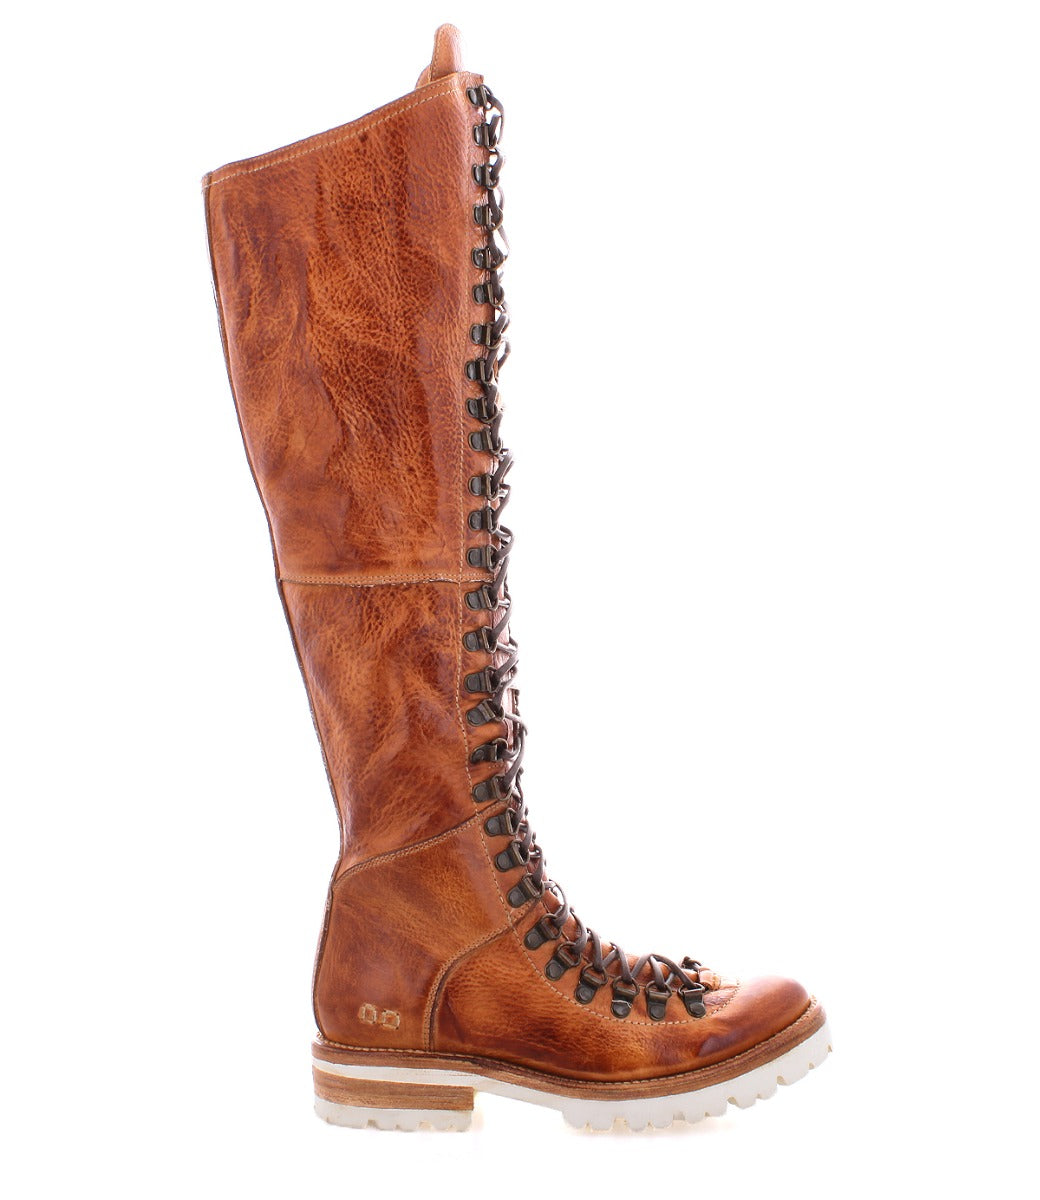 A women's brown leather boot with laces, the Lustrous boot by Bed Stu.